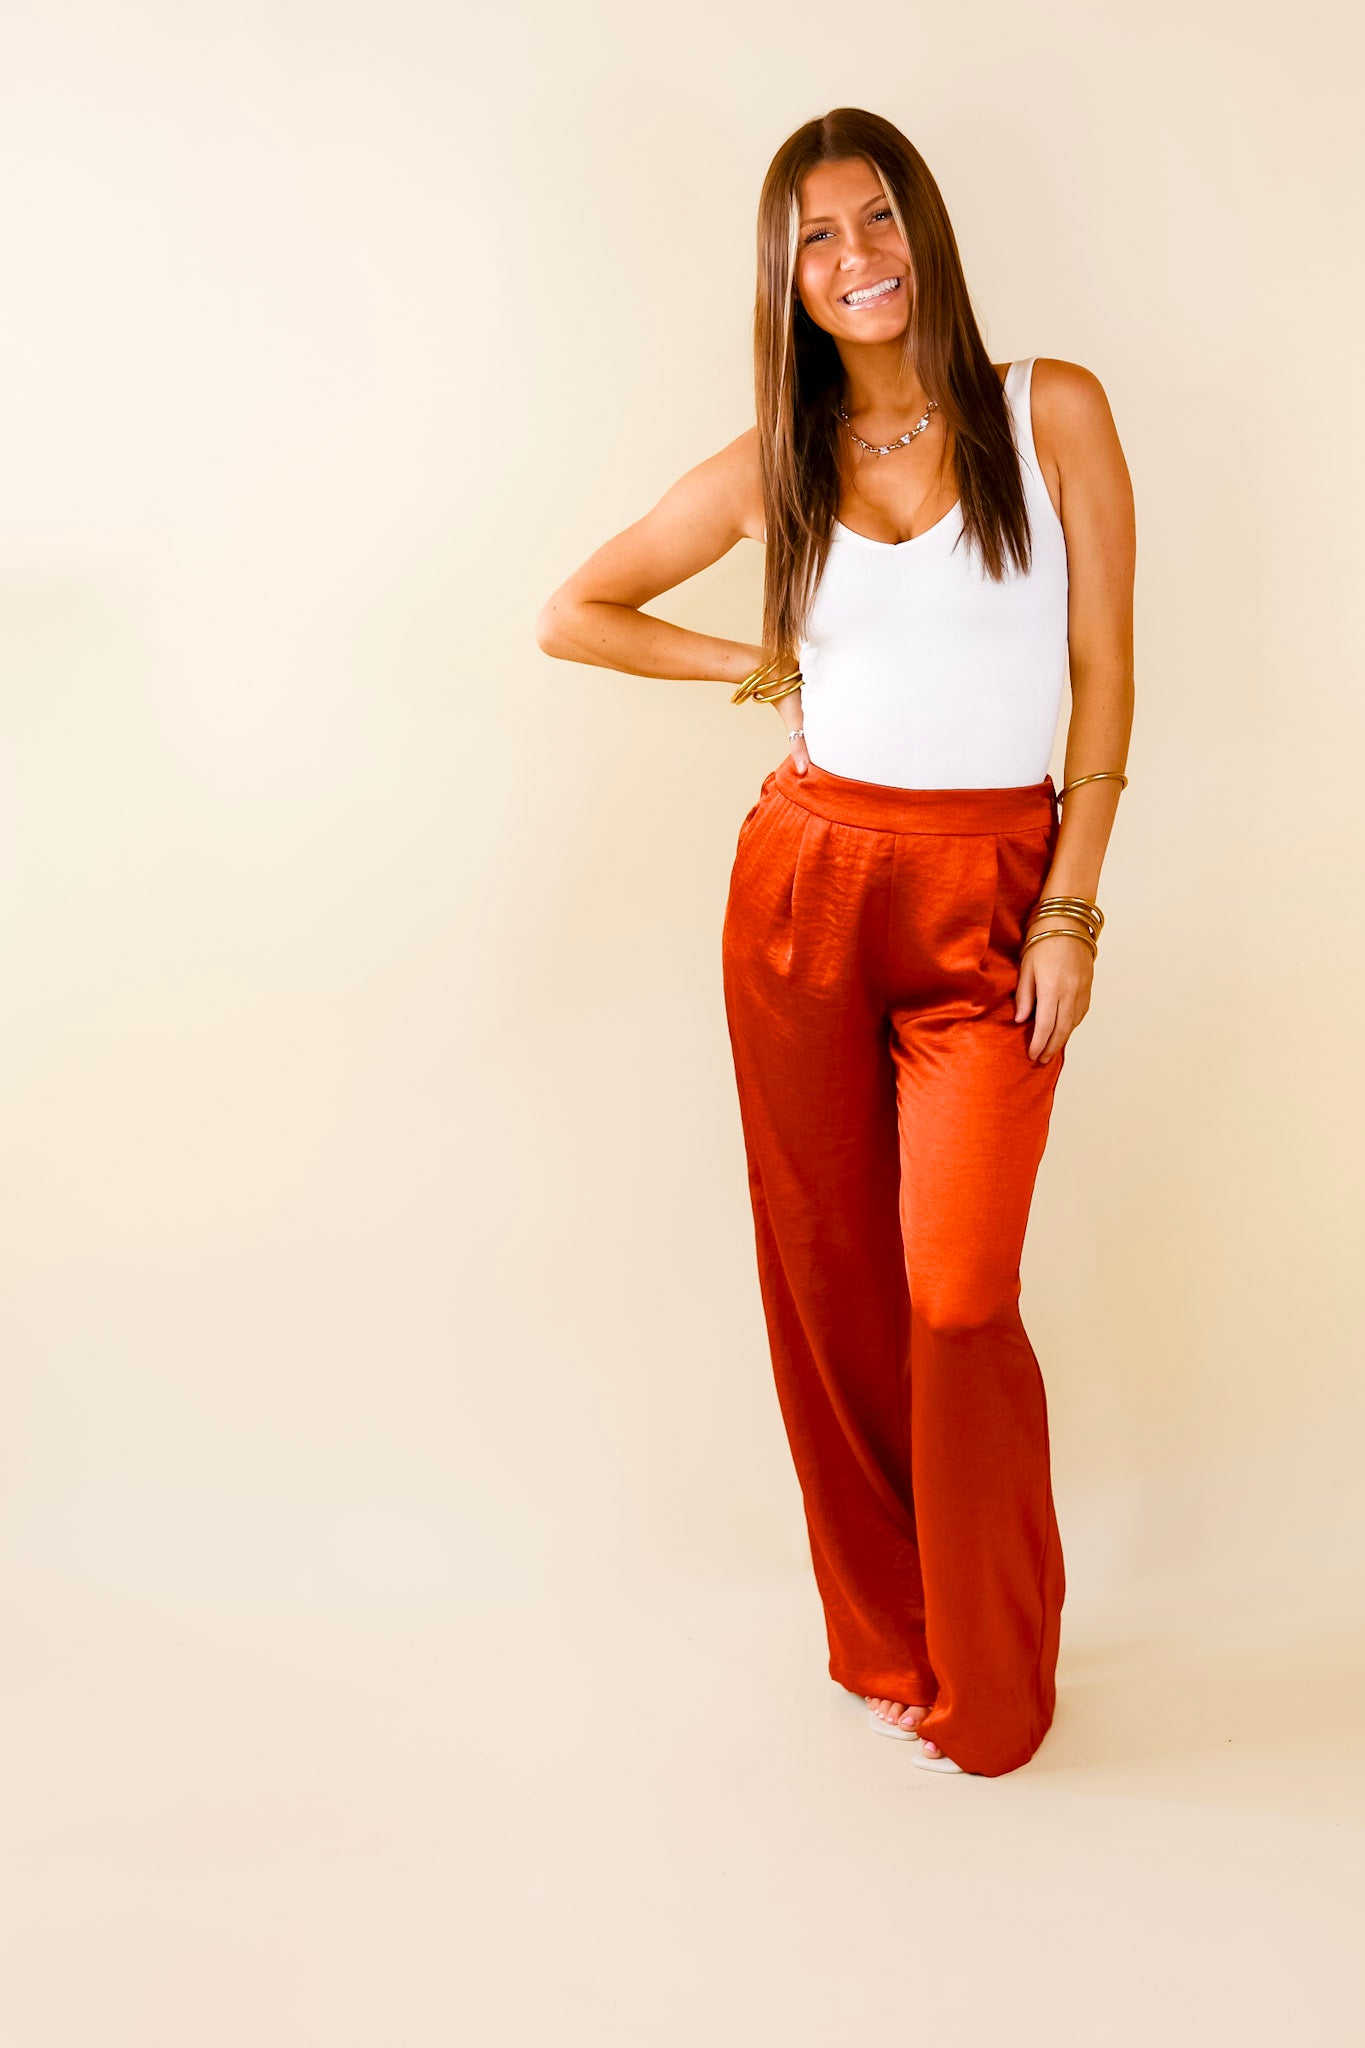 My Everything Satin Pants in Rust Orange - Giddy Up Glamour Boutique